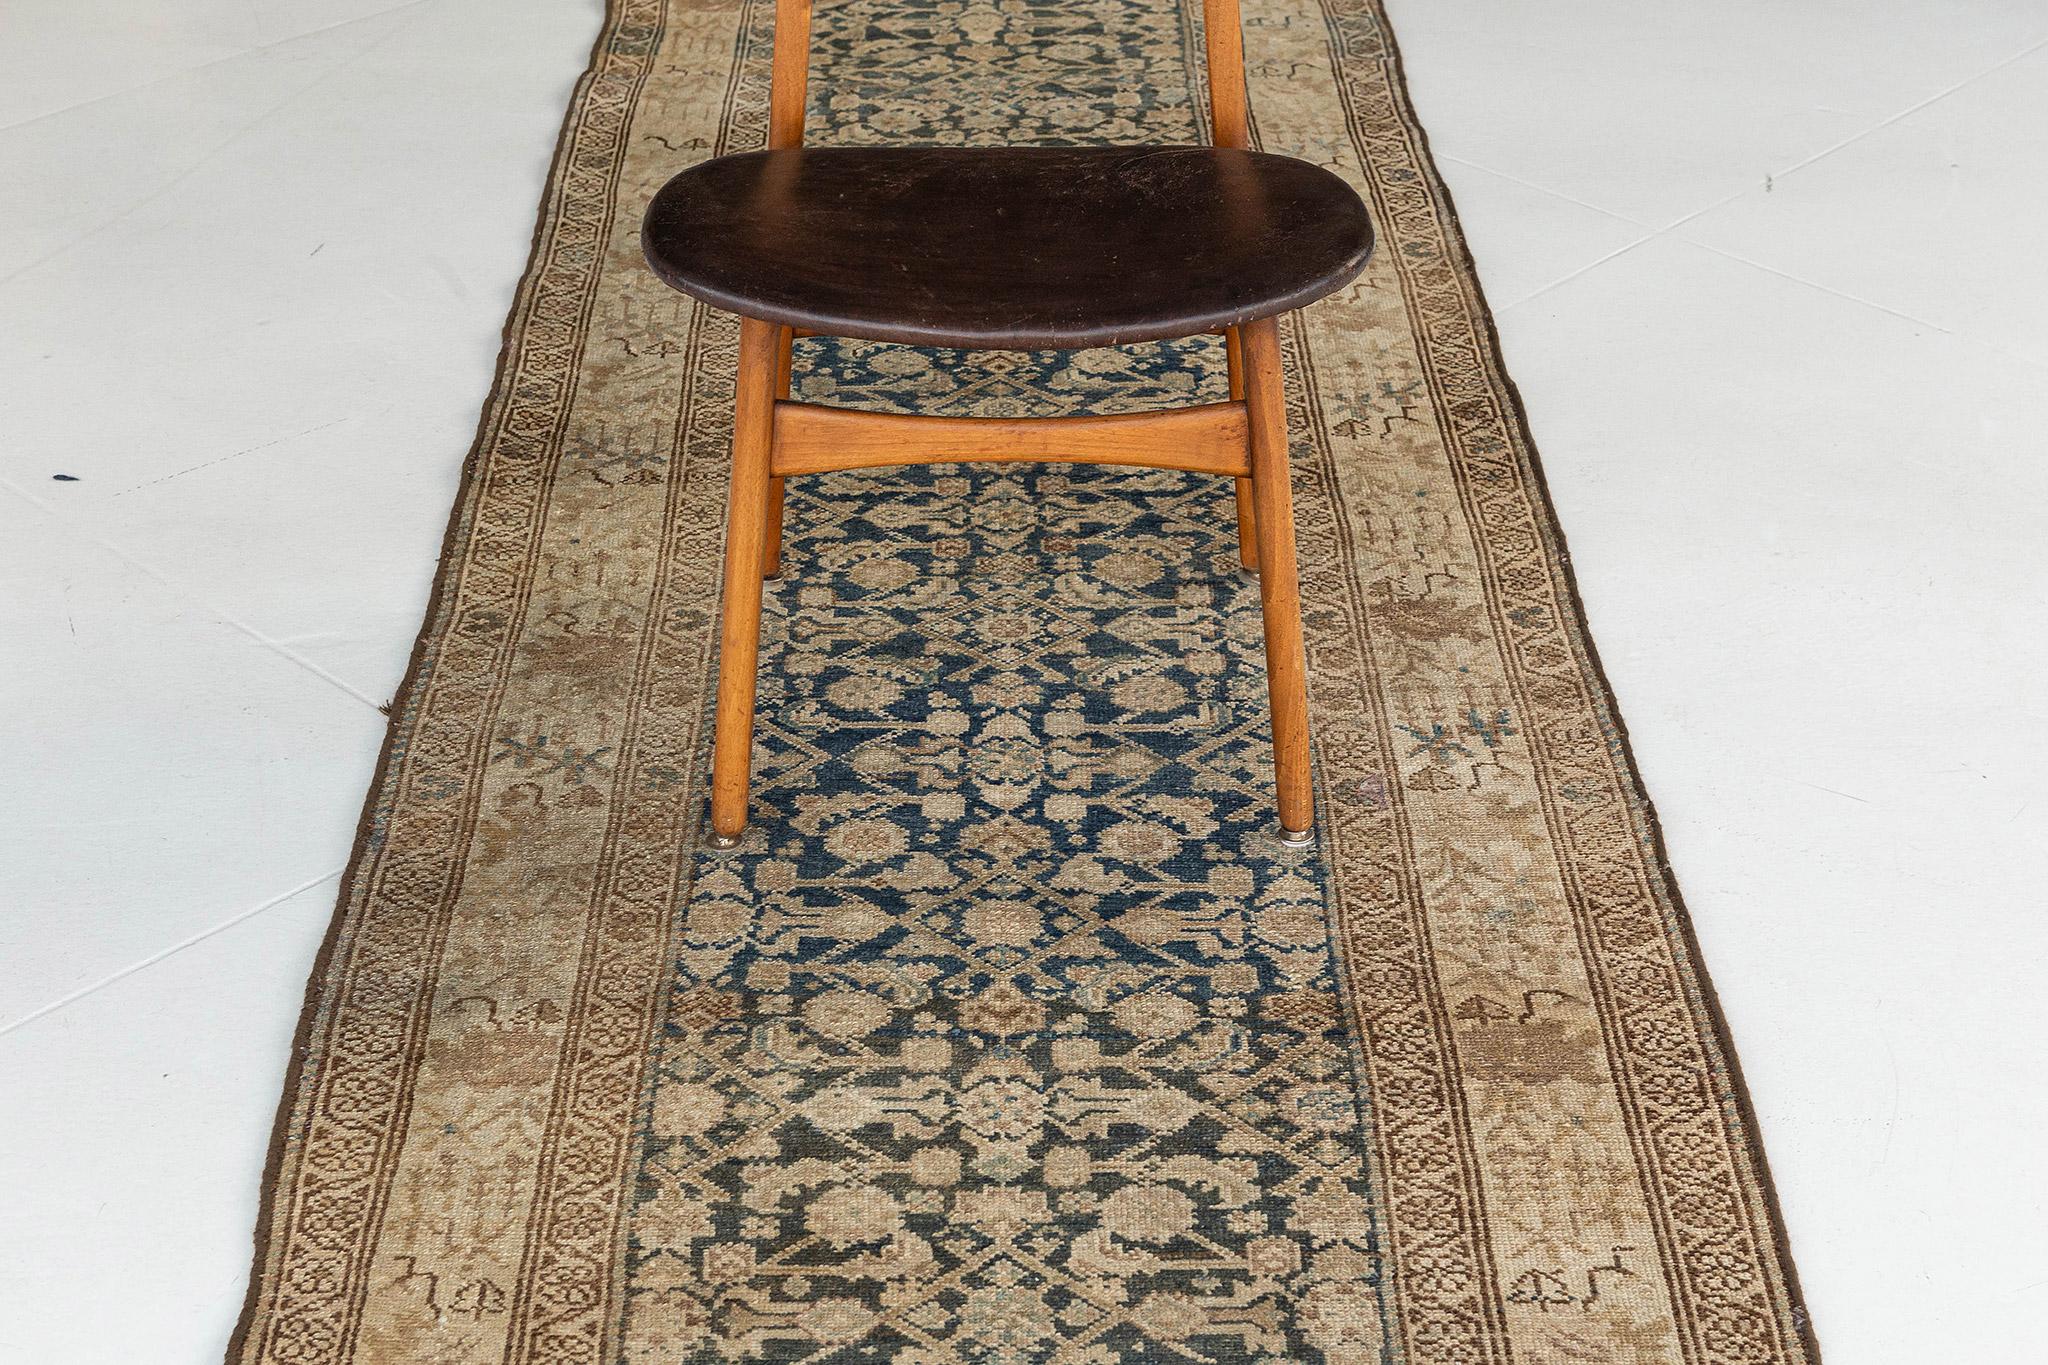 A ravishing Antique Persian Malayer Runner that features a dynamic all-over floral motifs that gracefully strewn across the abrashed field. Enclosed by borders composed of floral meander guard bands, this rug displays an appealing and elegant impact